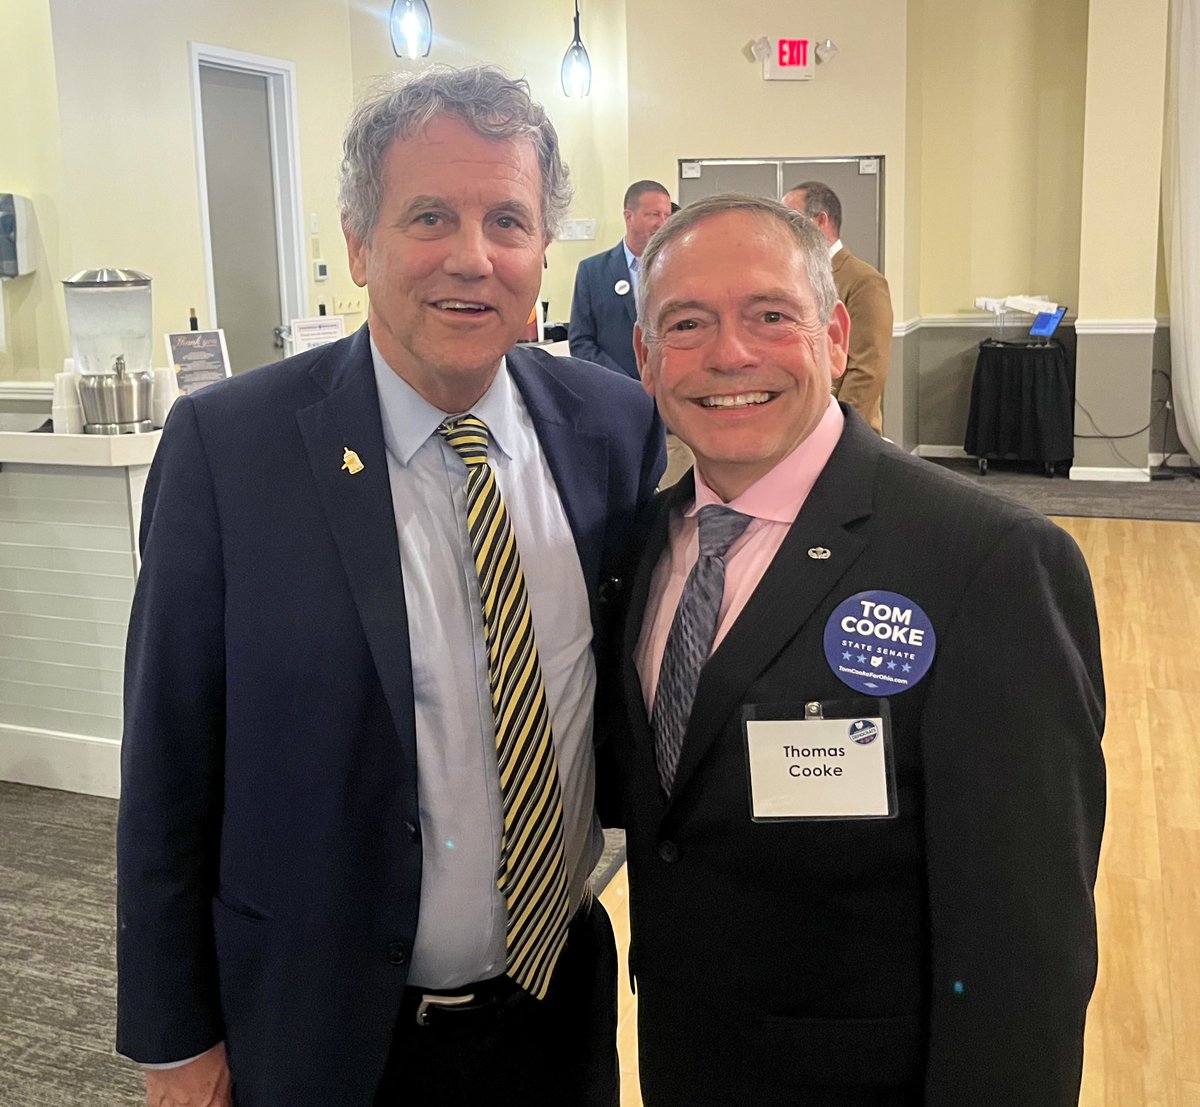 Spent some time last night with the most pro-worker Senator in the United States. Thrilled to run alongside Senator @SherrodBrown this year!